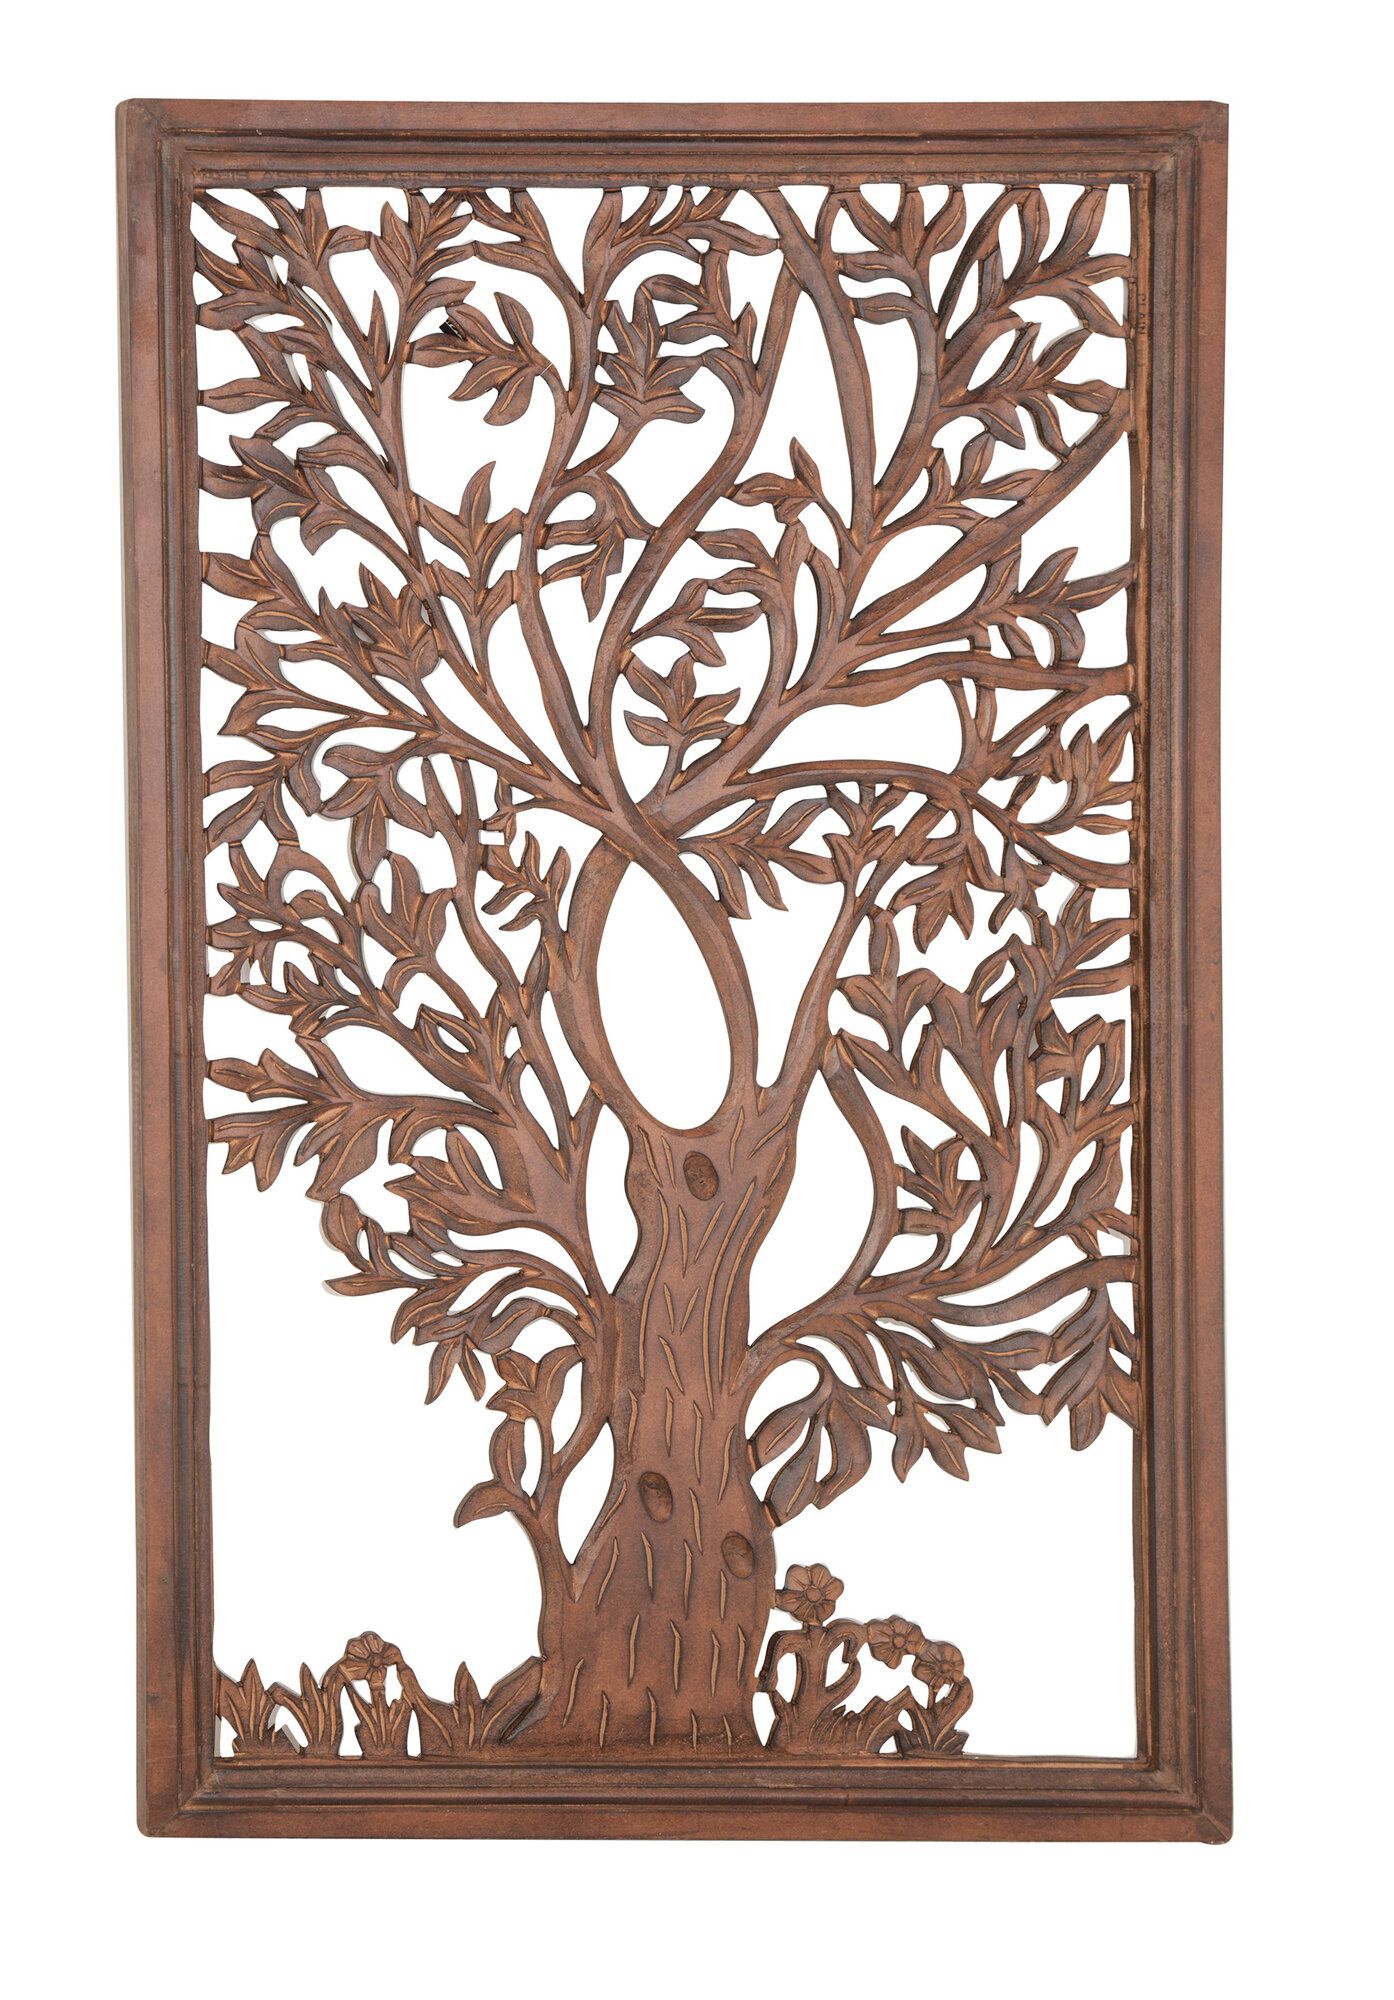 Red Barrel Studio Rectangular Wood Carved Tree Wall Decor 192463054796 For Current Rectangular Wall Art (View 2 of 20)